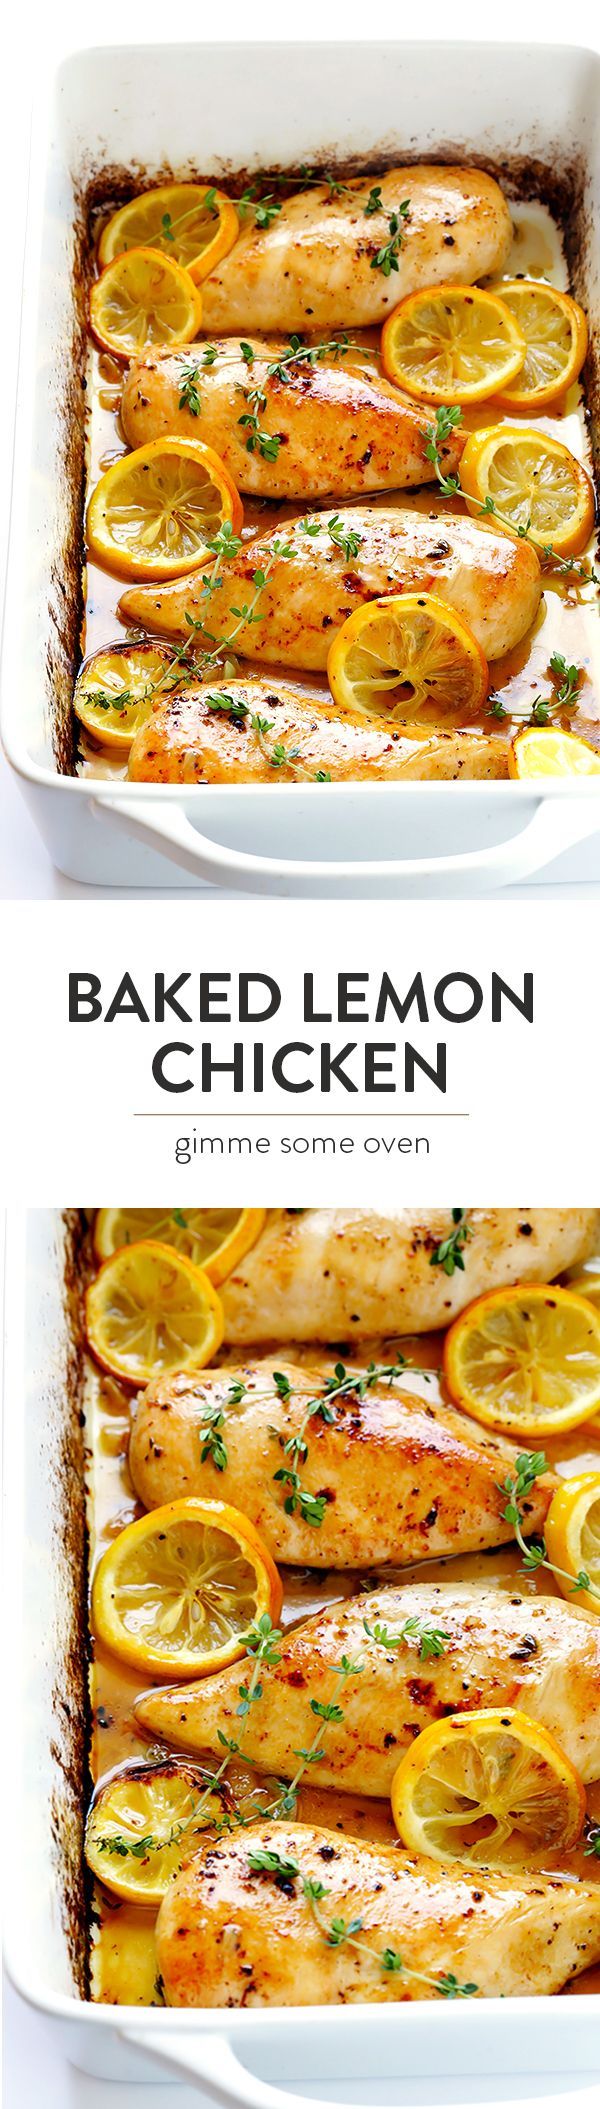 This easy Baked Lemon Chicken recipe is made with simple fresh ingredients, it’s perfectly cooked so that the chicken is tender